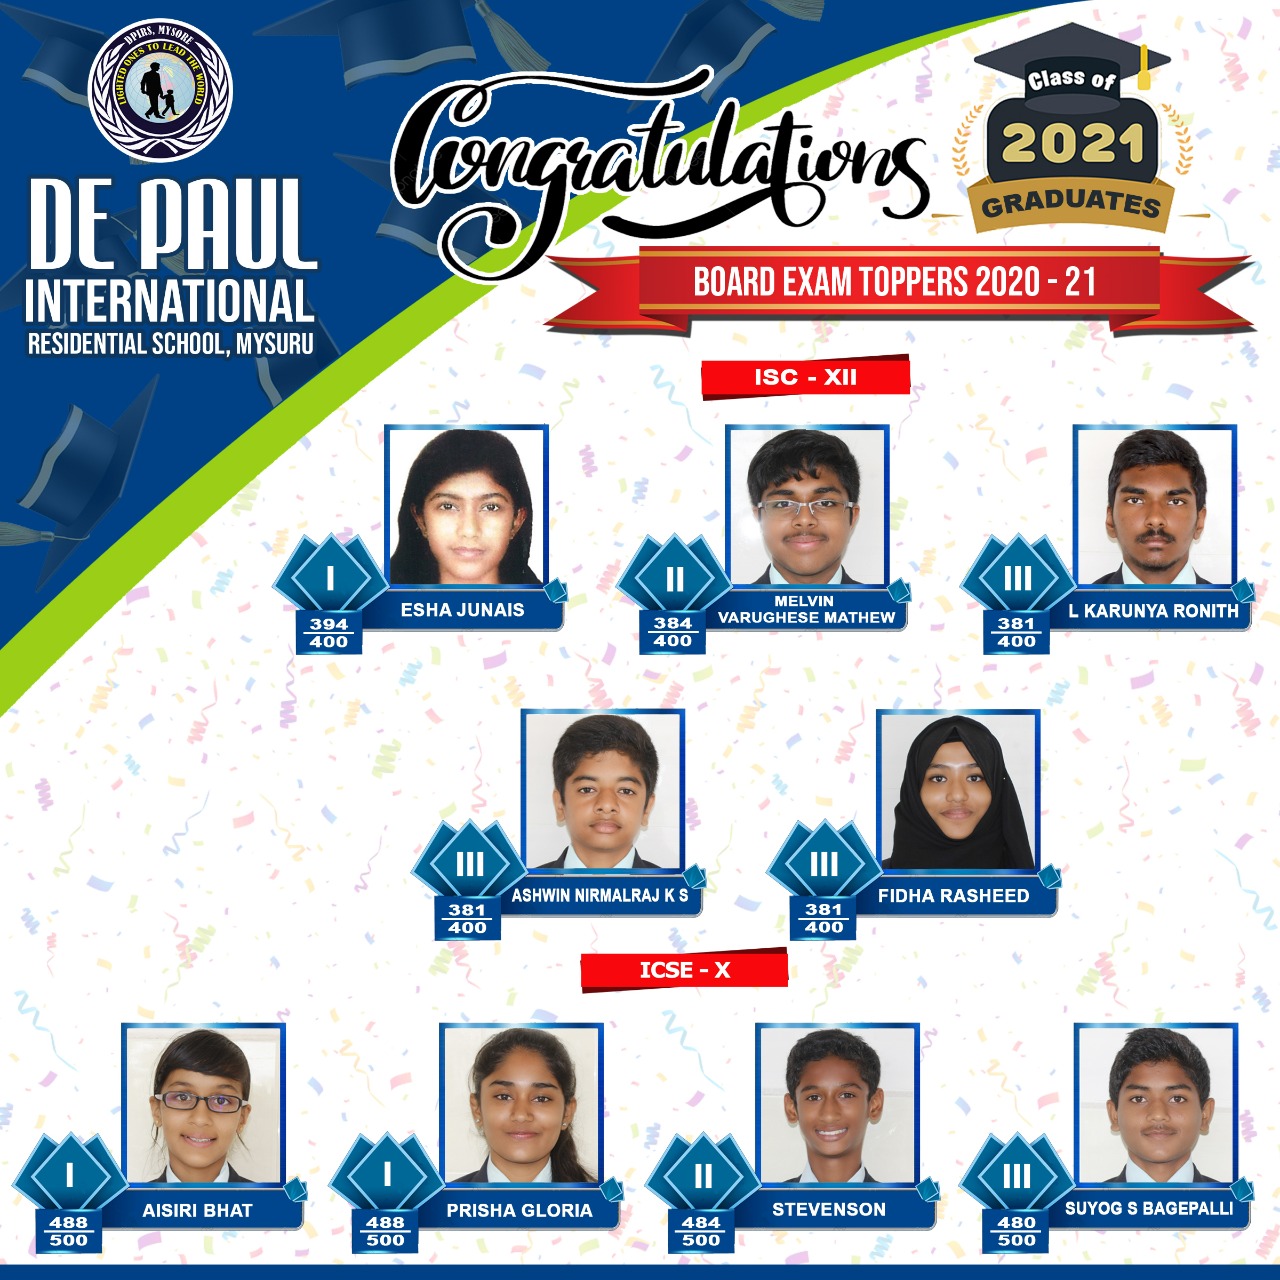 CONGRATULATIONS TO BOARD EXAM TOPPERS 2020-21